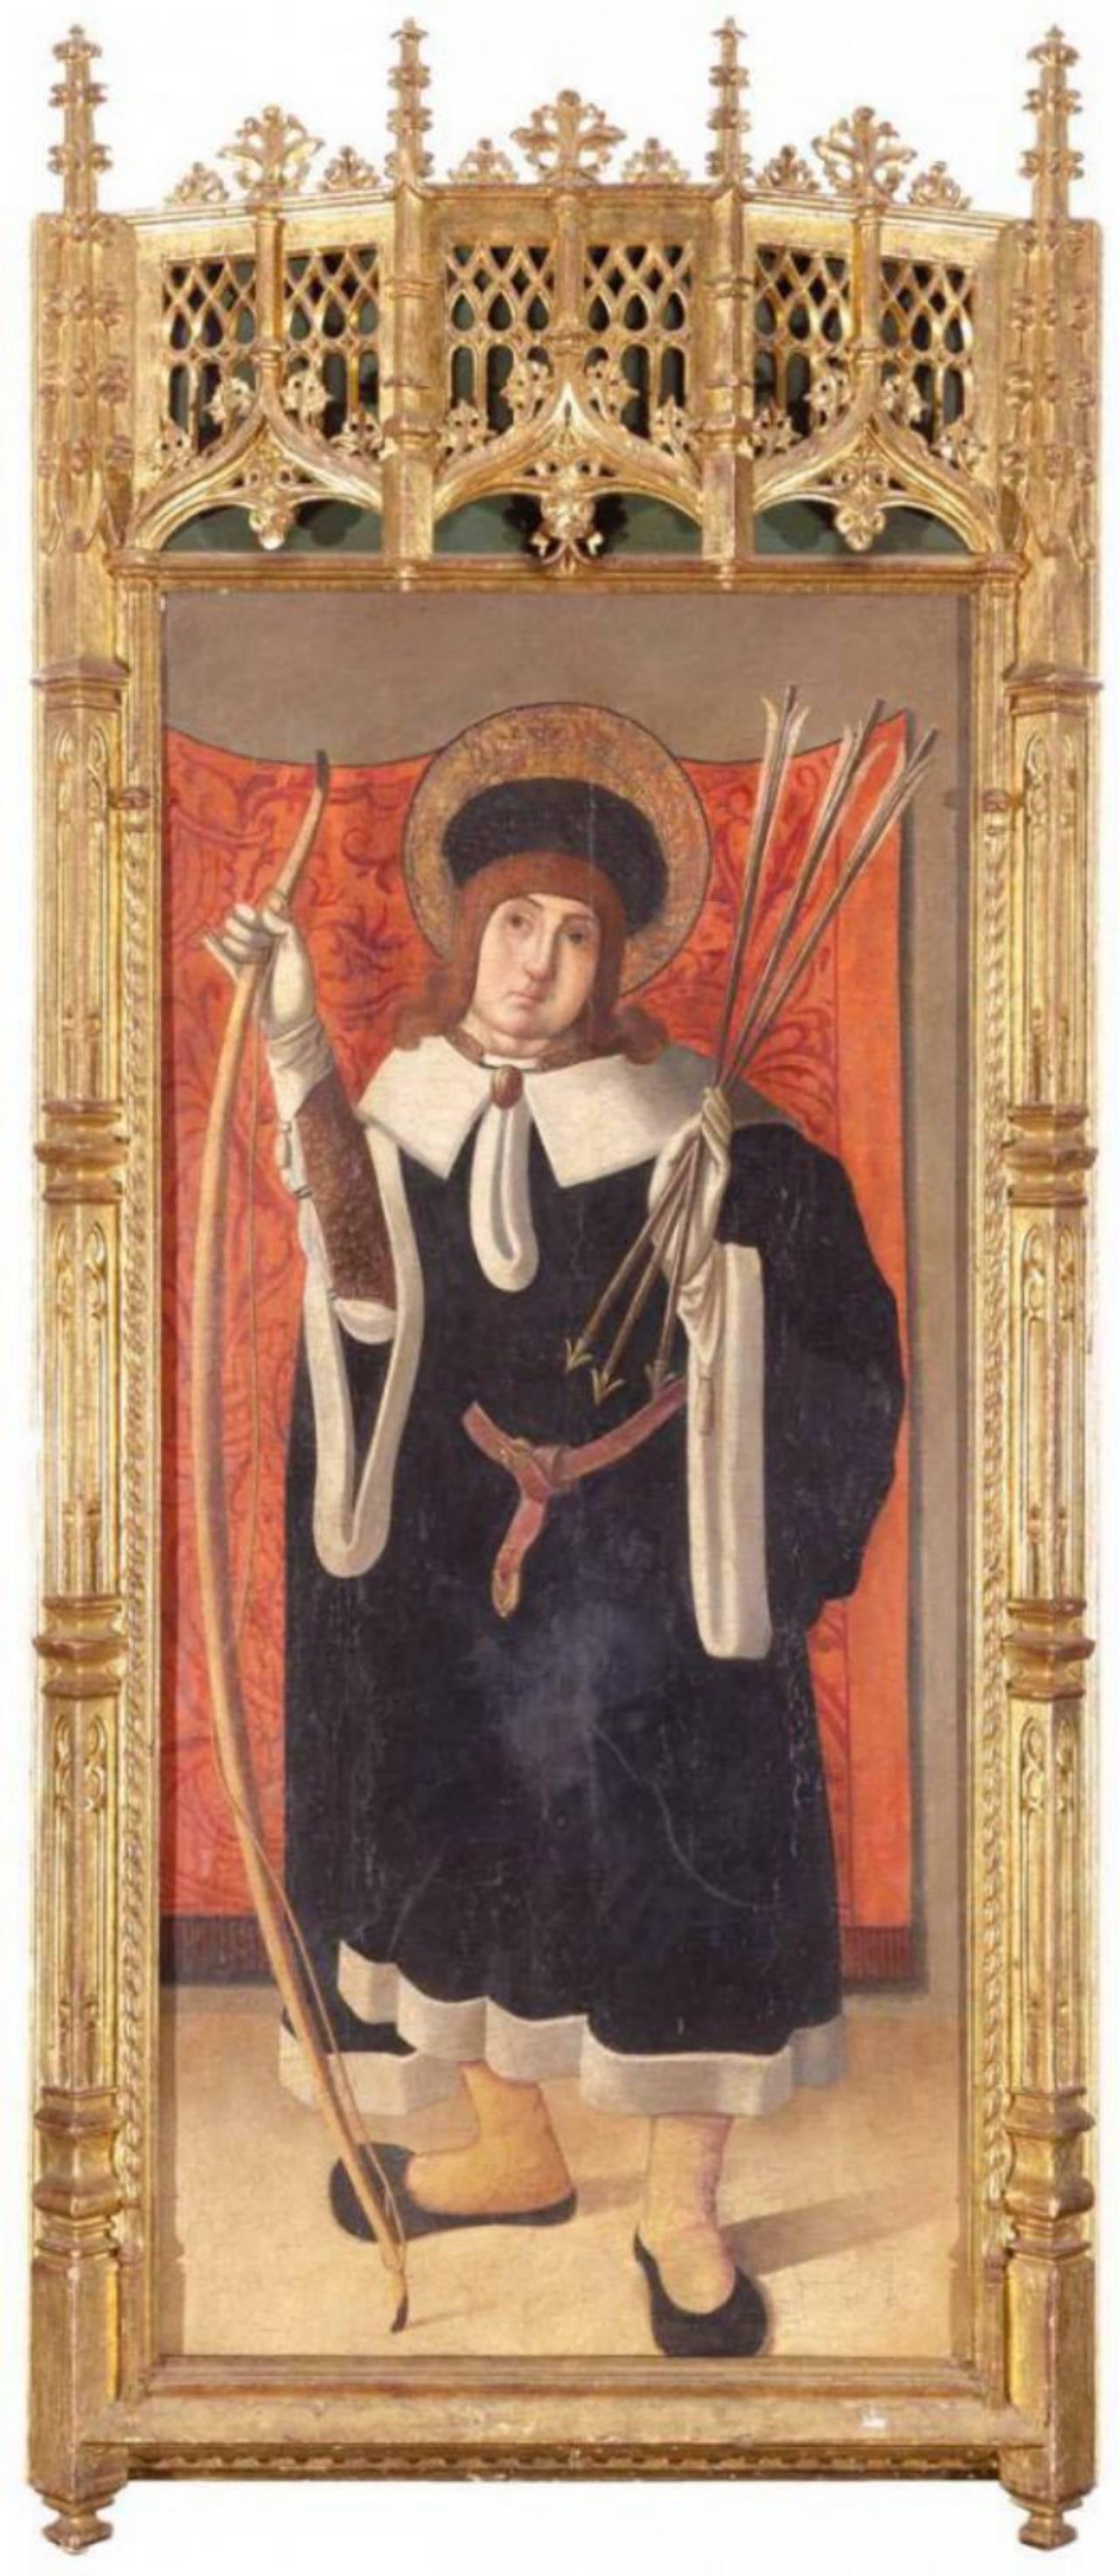 Unknown Portrait Painting - Monumental Spanish School Of The 15th Century